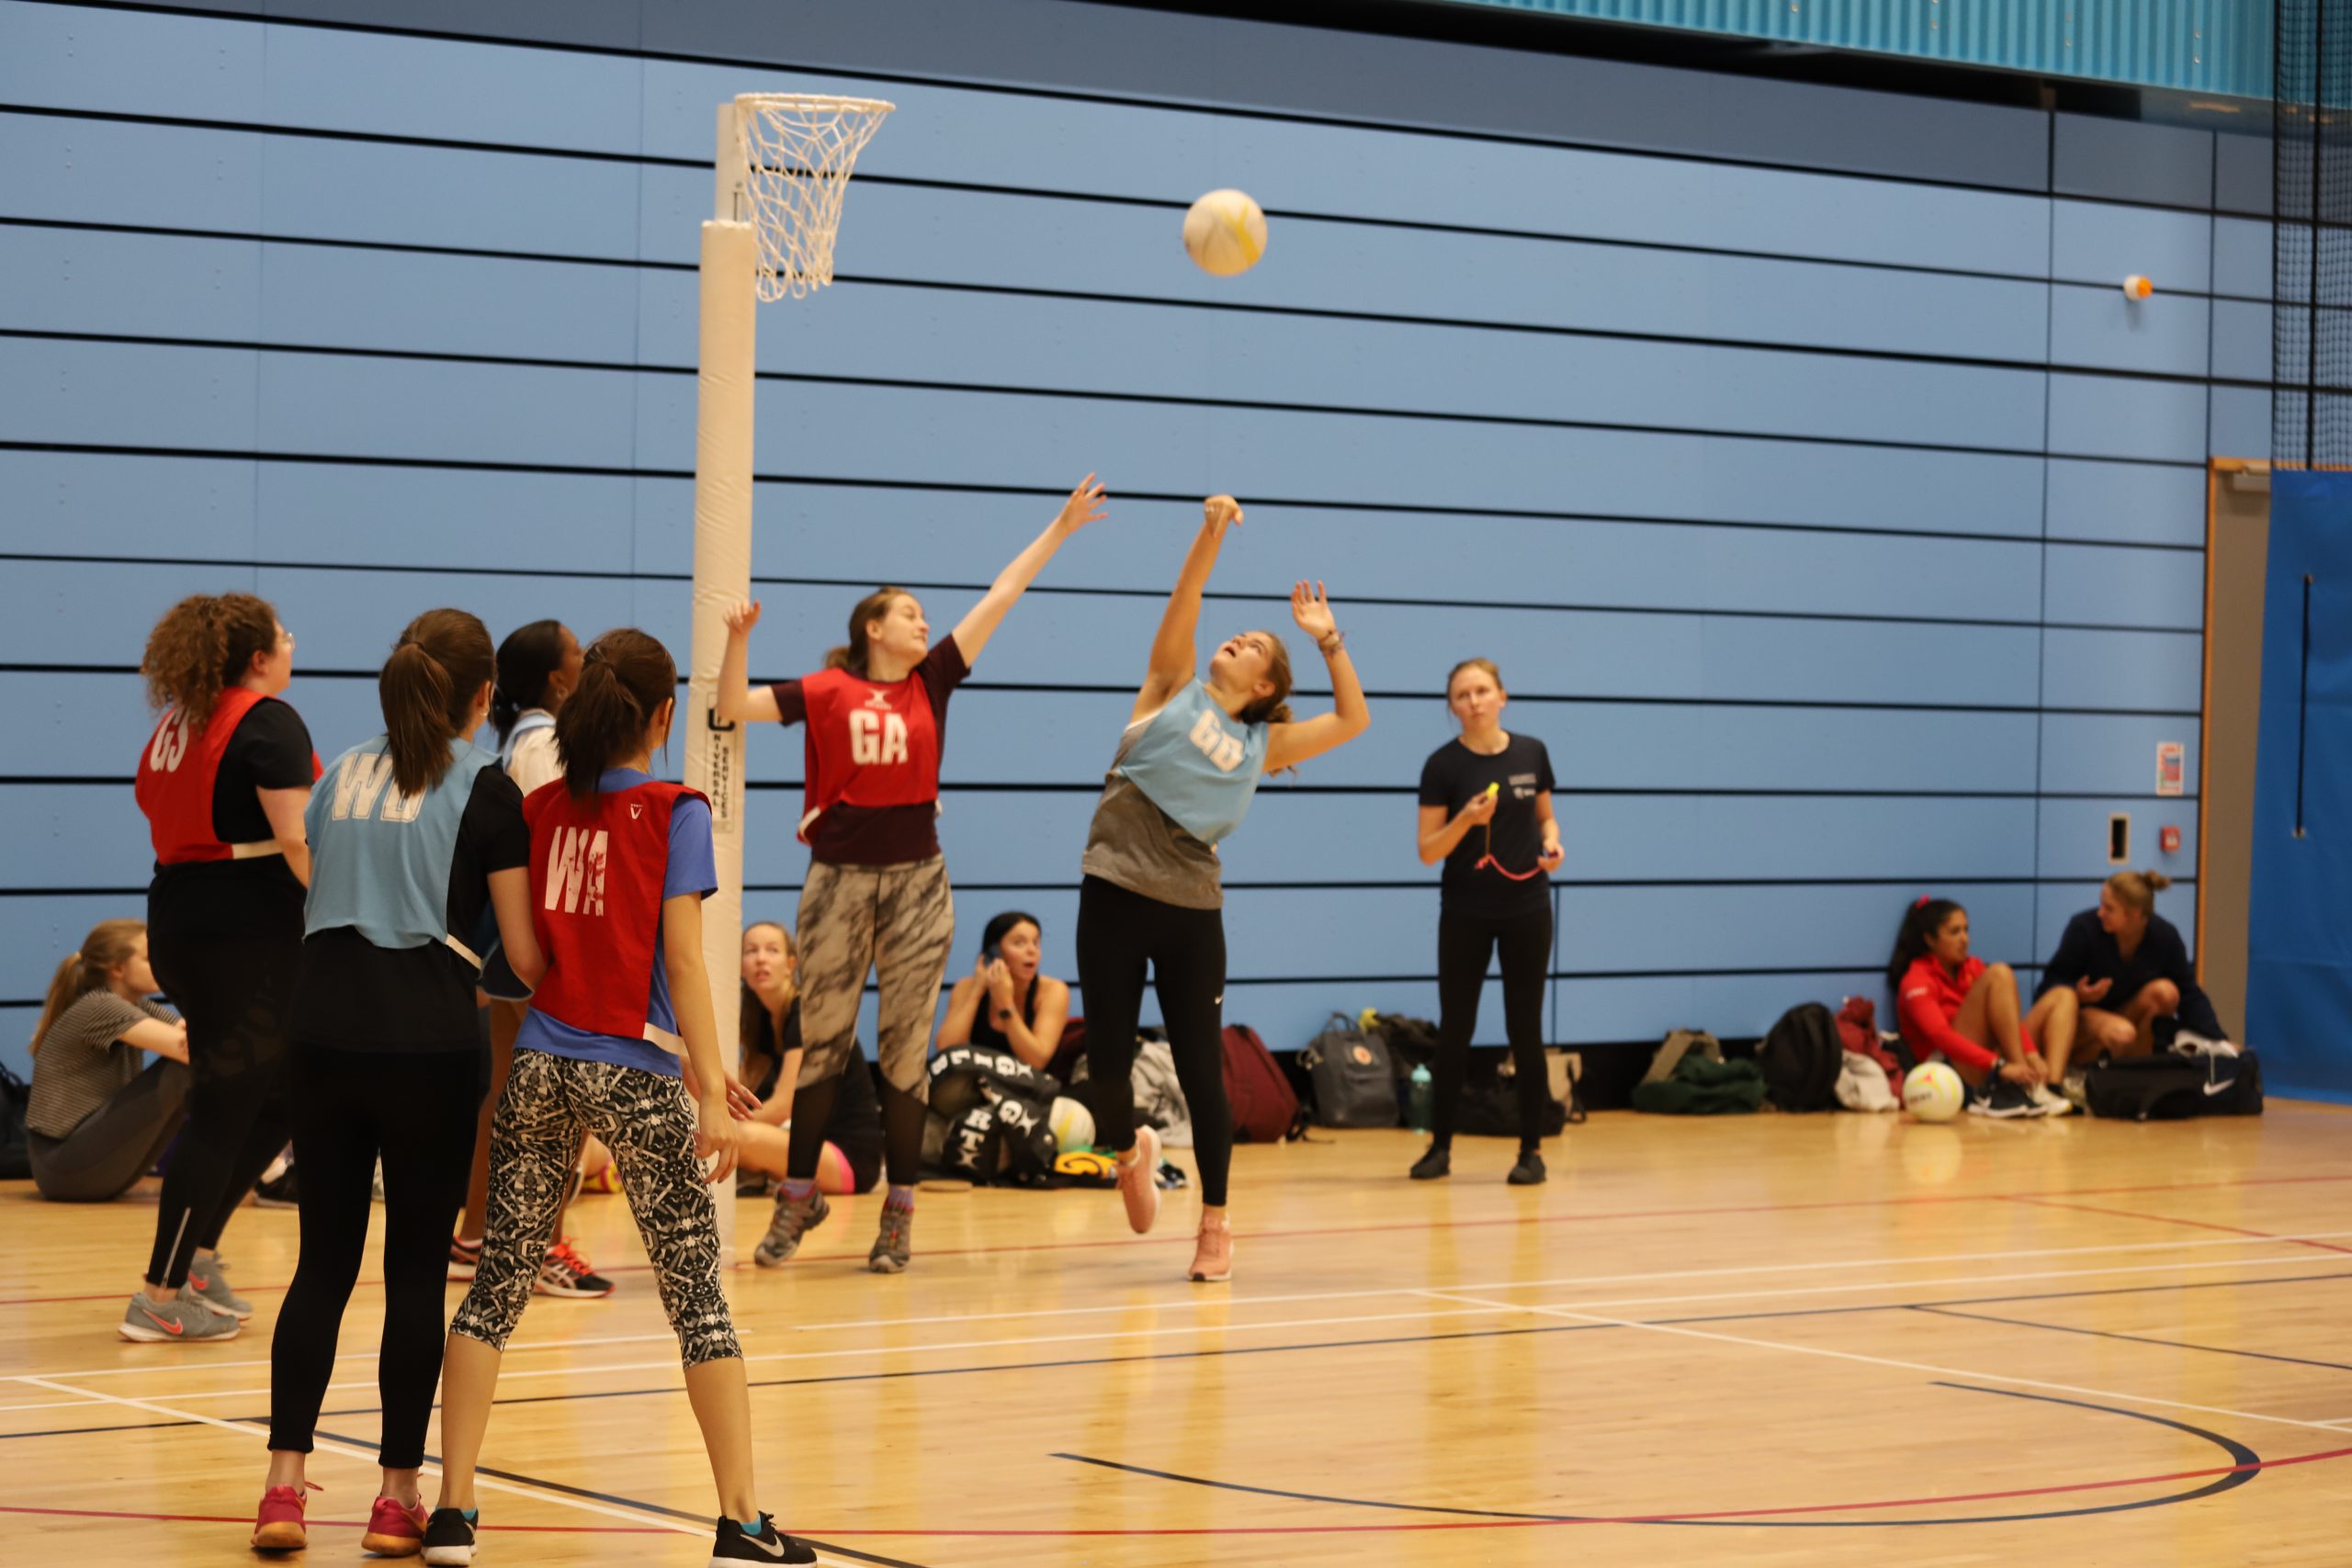 Group of Netballers fighting for the ball in a sports hall